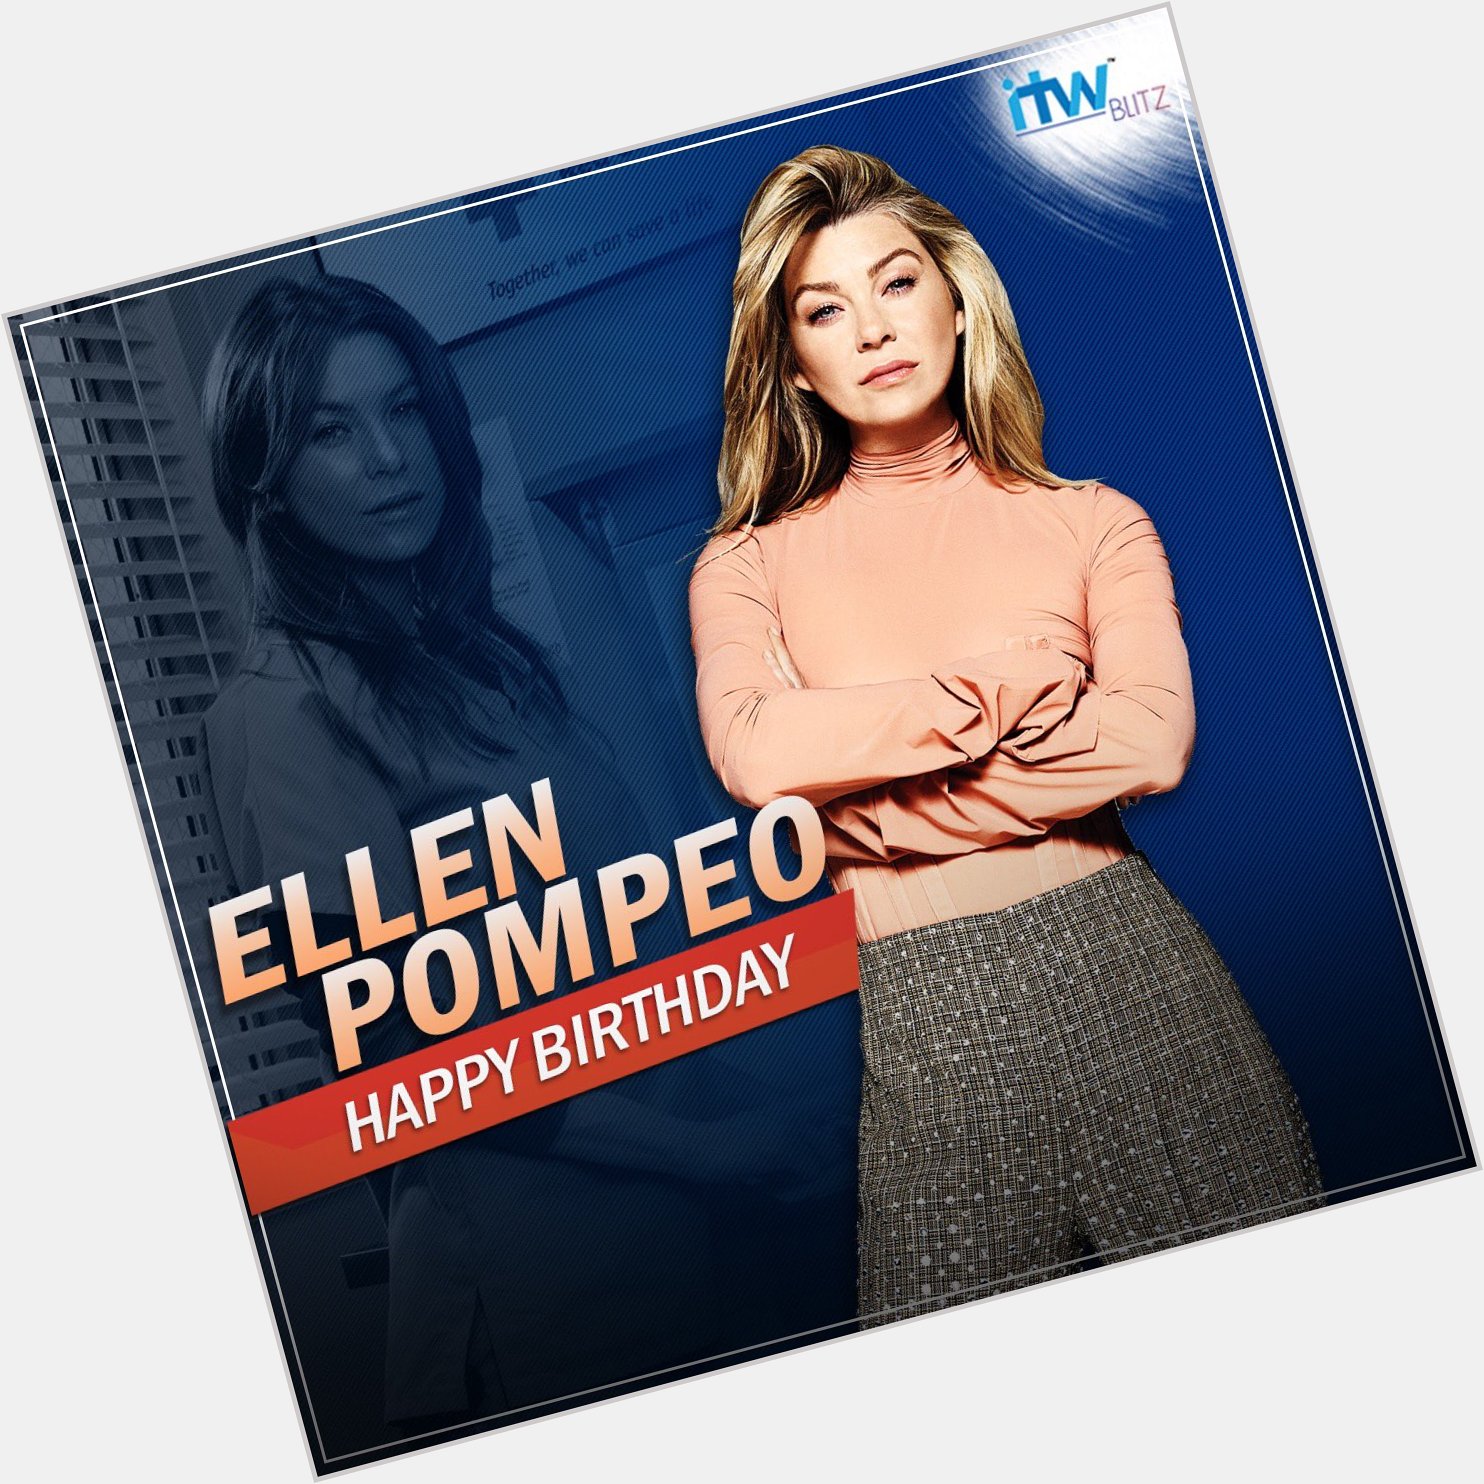 Wishing the infamous Dr. Grey Ellen Pompeo
A very happy birthday!   